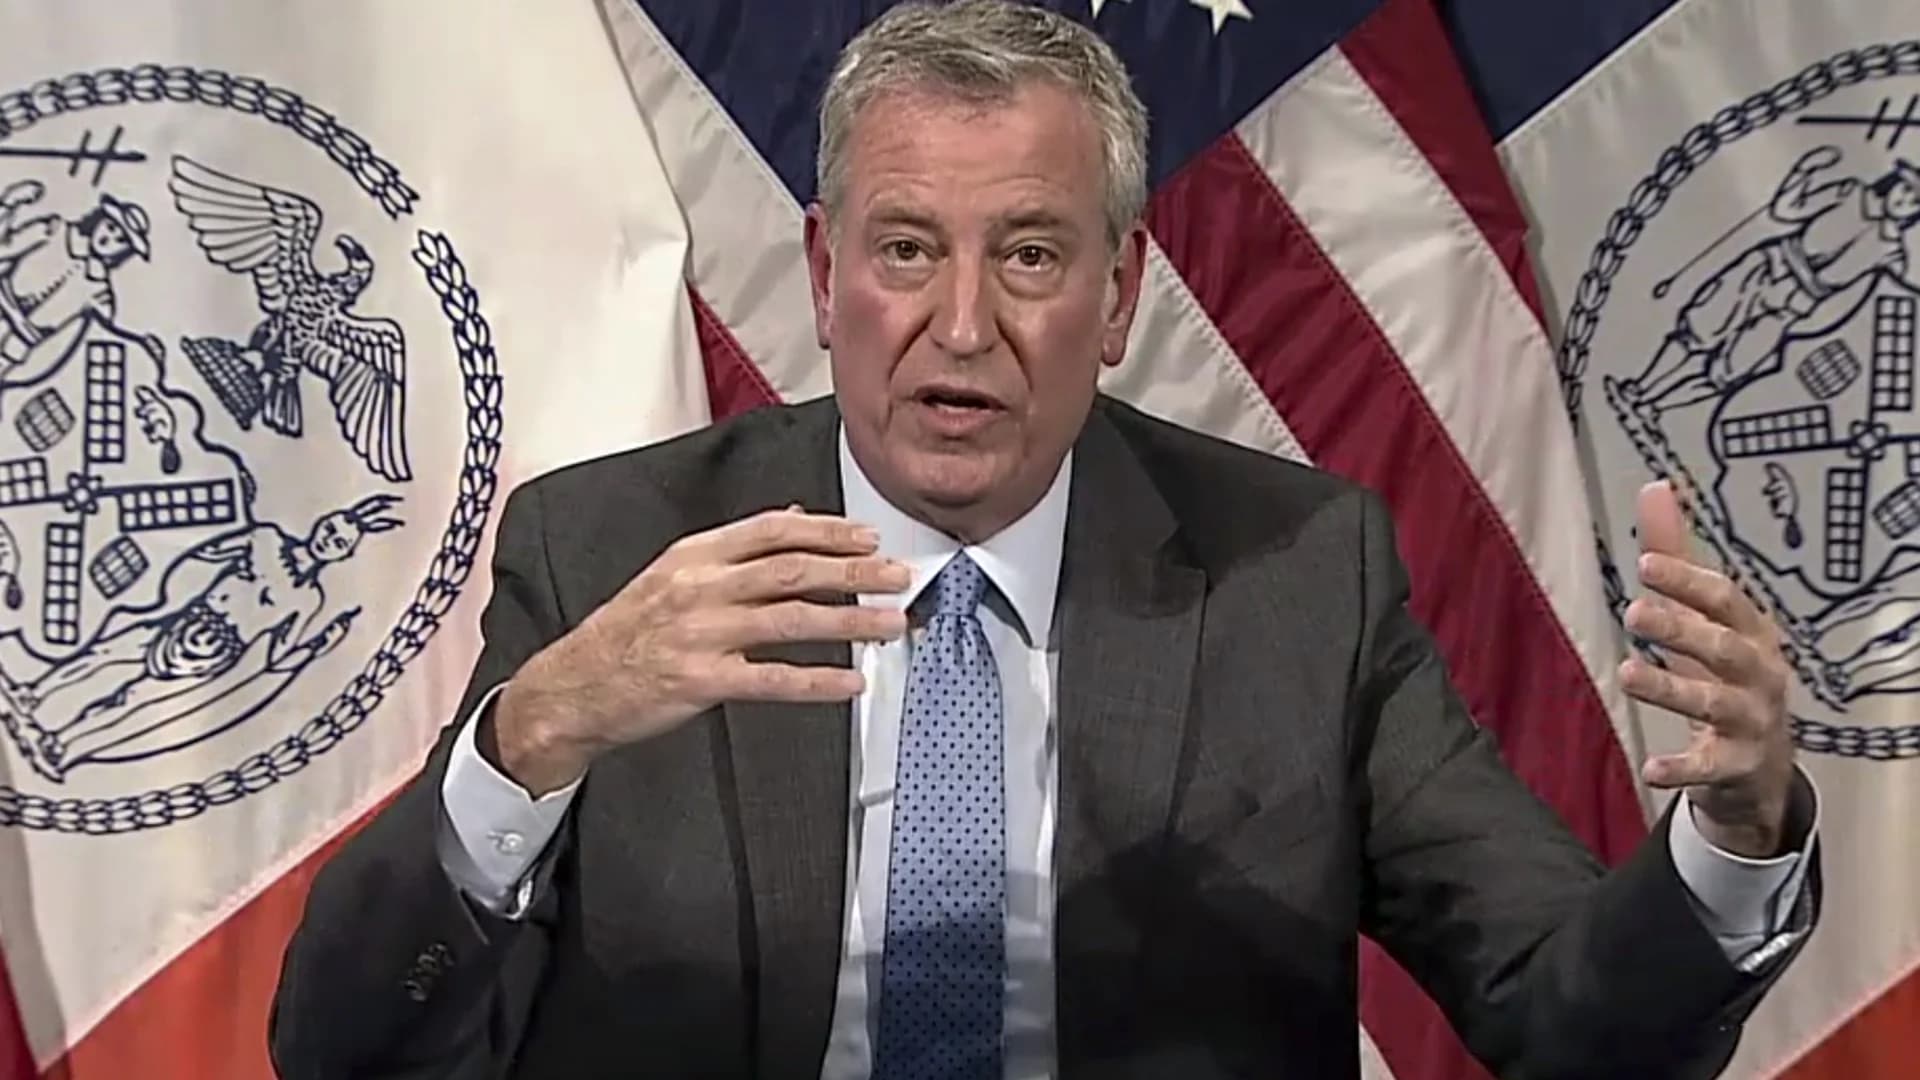 WATCH LIVE: Mayor de Blasio holds news conference after vaccine mandate expansion announcement